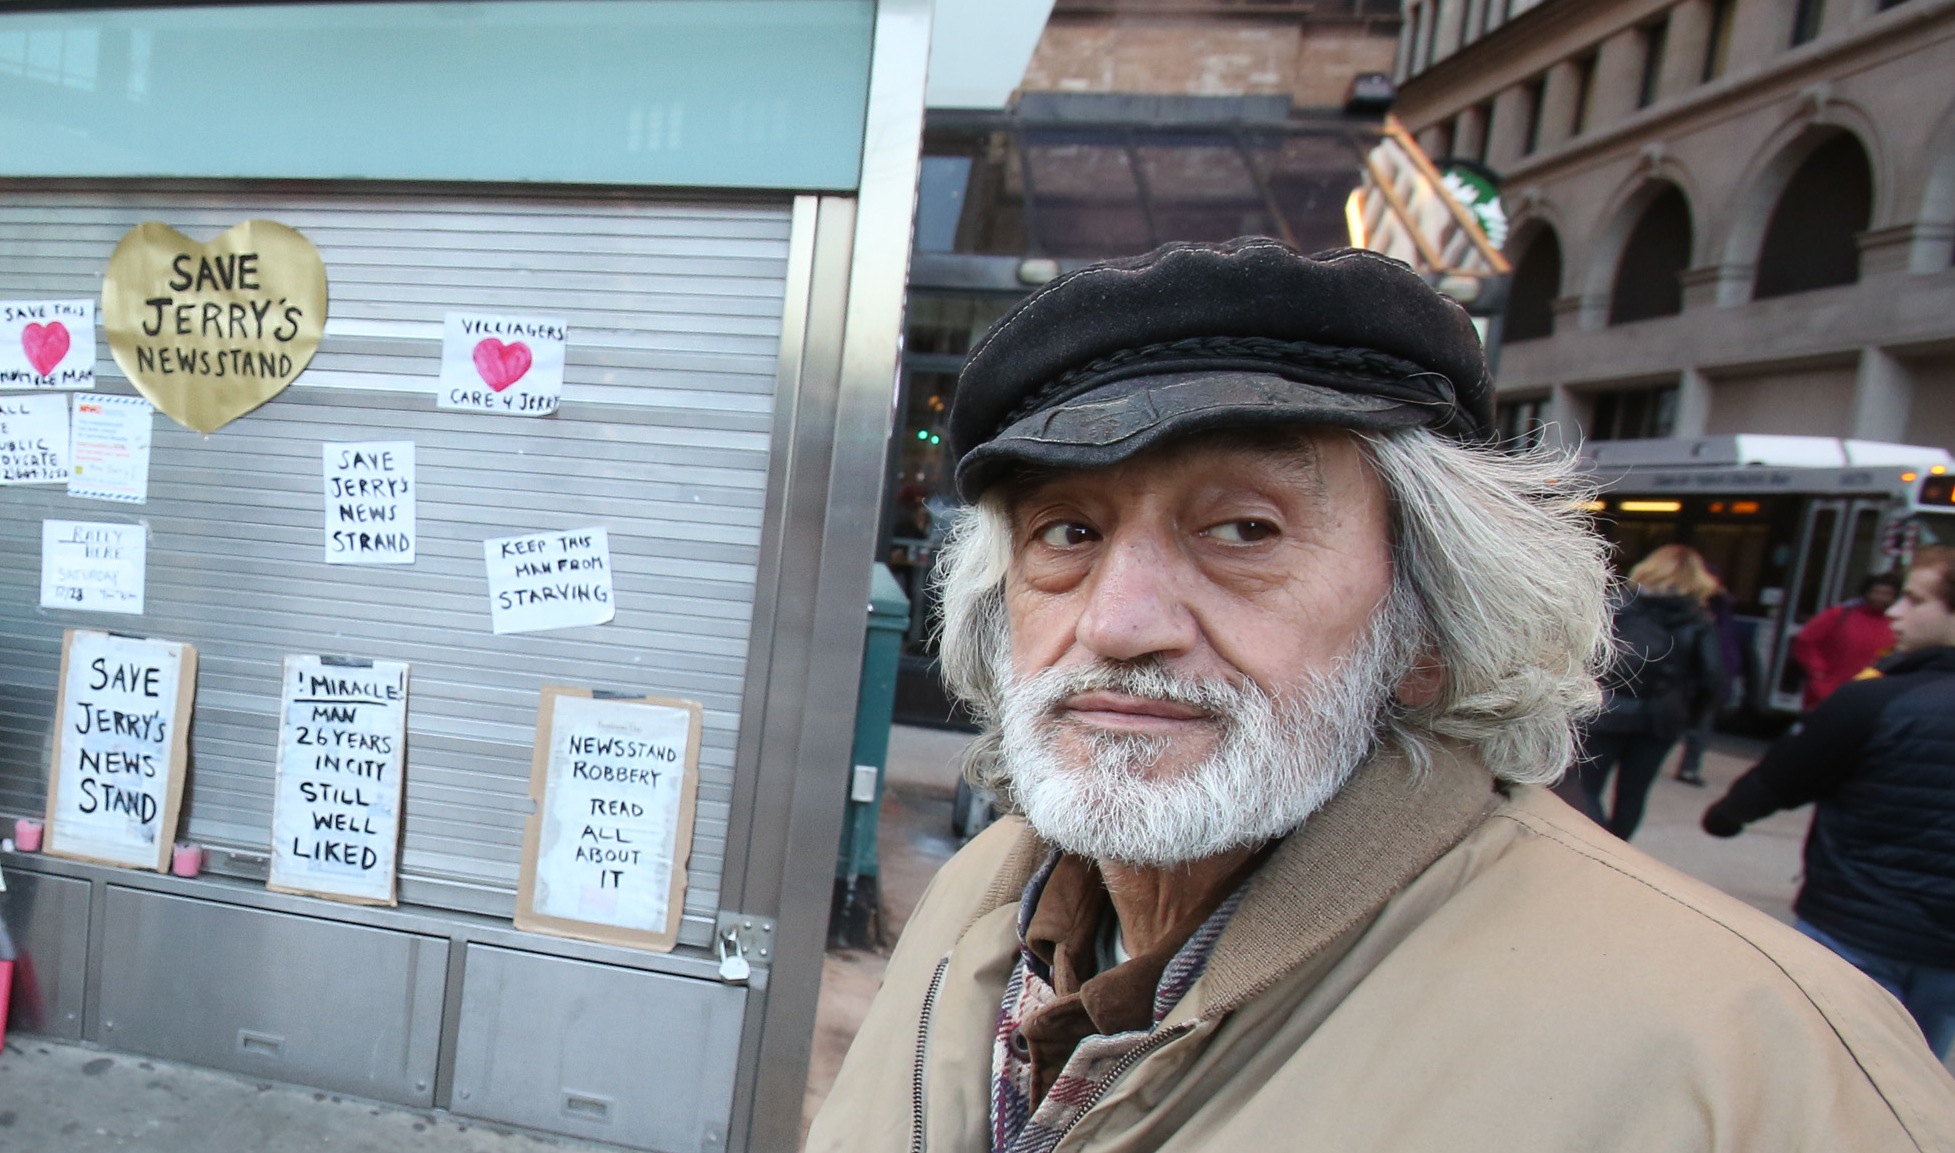 Jerry Delakas has operated the newsstand at Astor Place and Fourth Ave. for 27 years. File photo by Jefferson Siegel